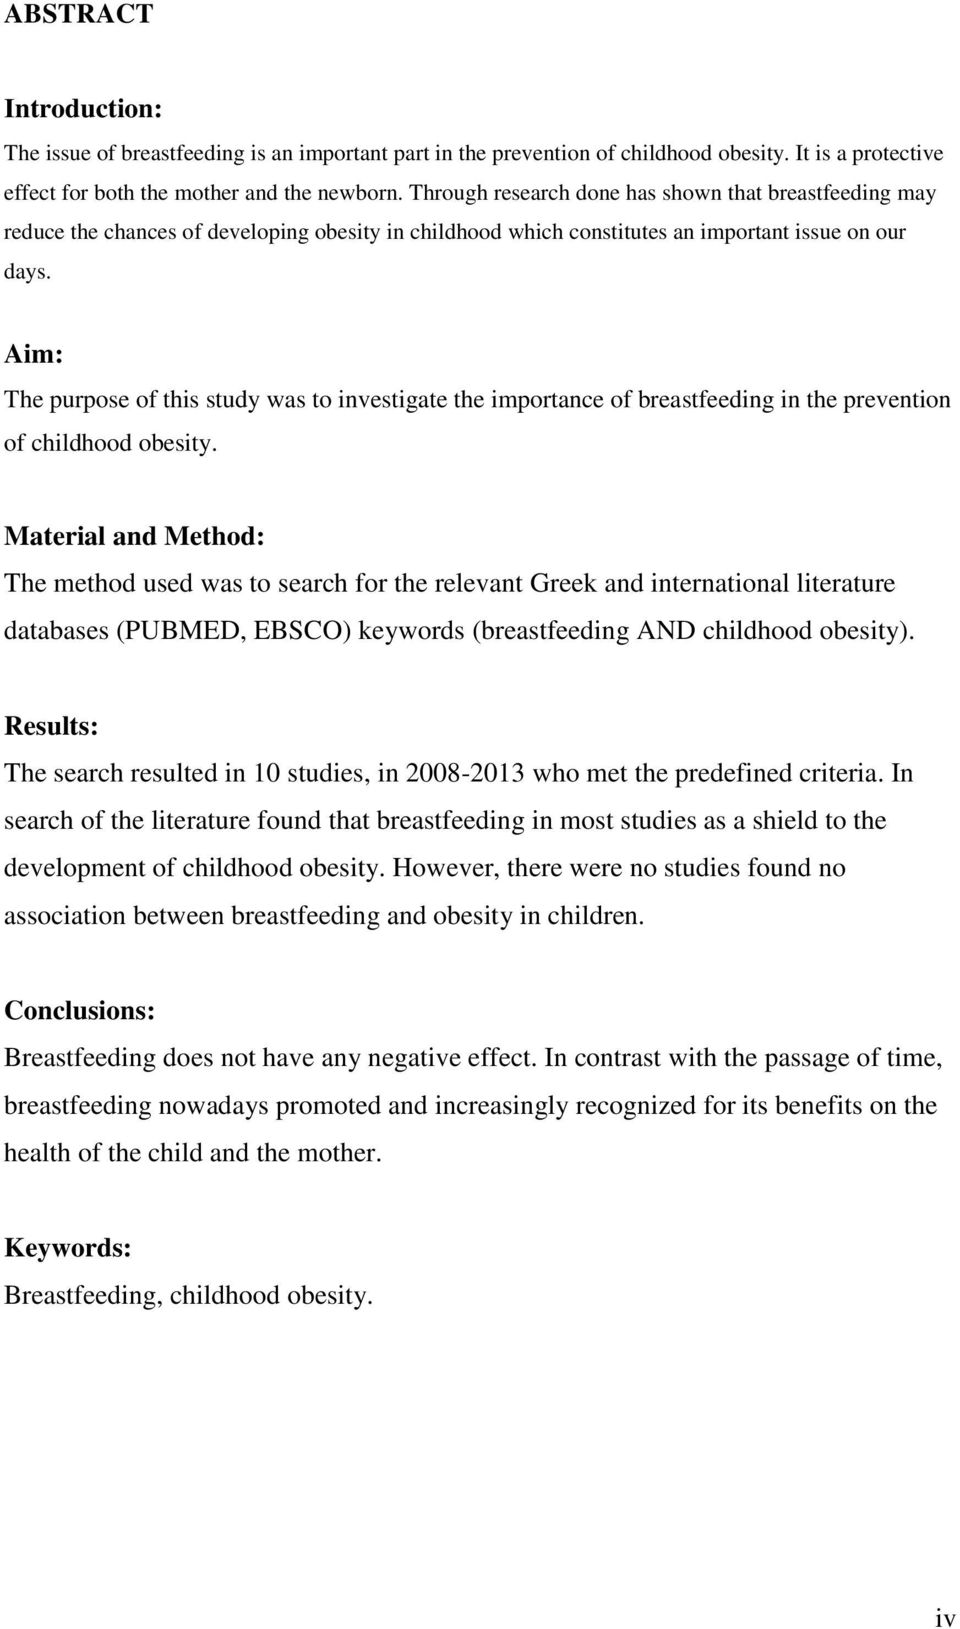 Aim: The purpose of this study was to investigate the importance of breastfeeding in the prevention of childhood obesity.